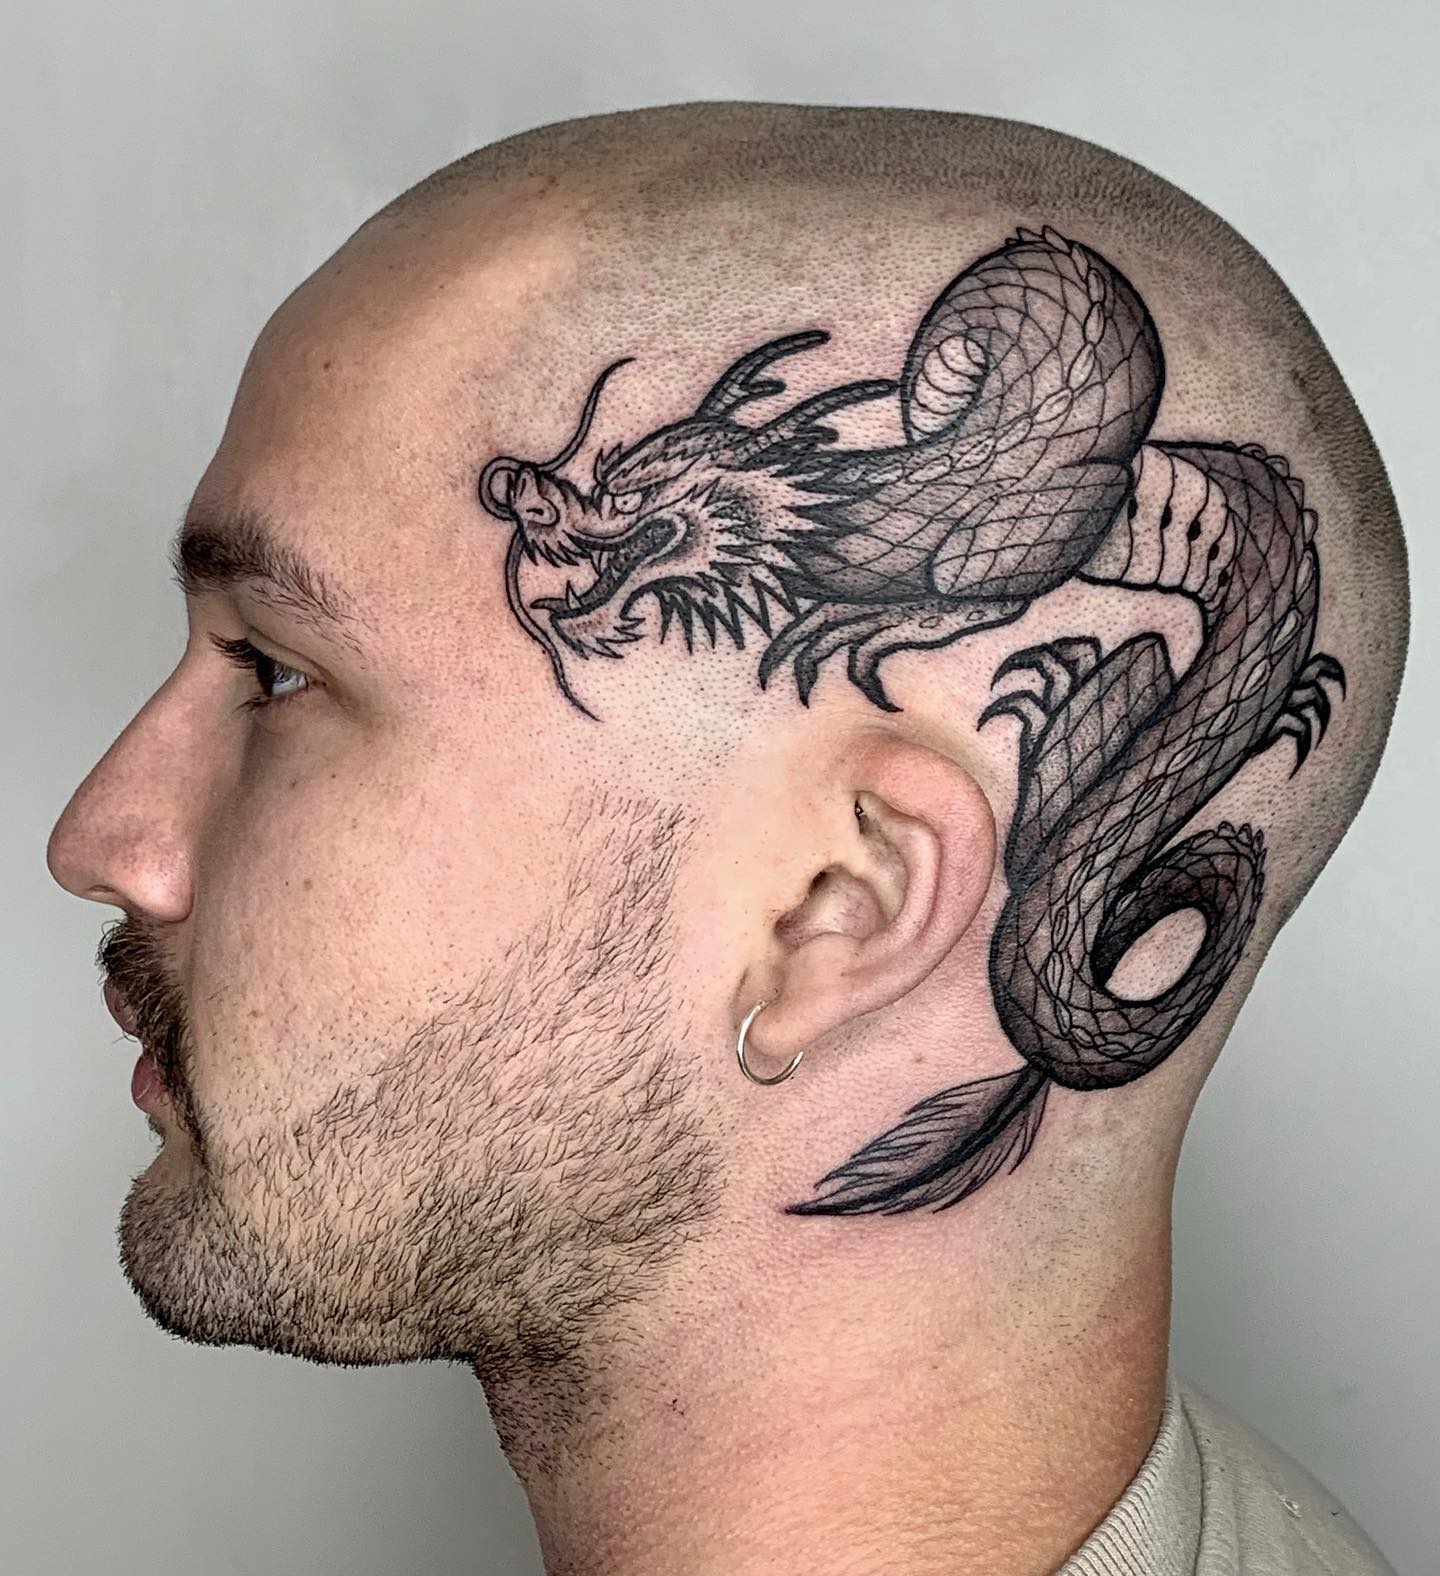 Black Dragon Tattoo on the Side of the Head